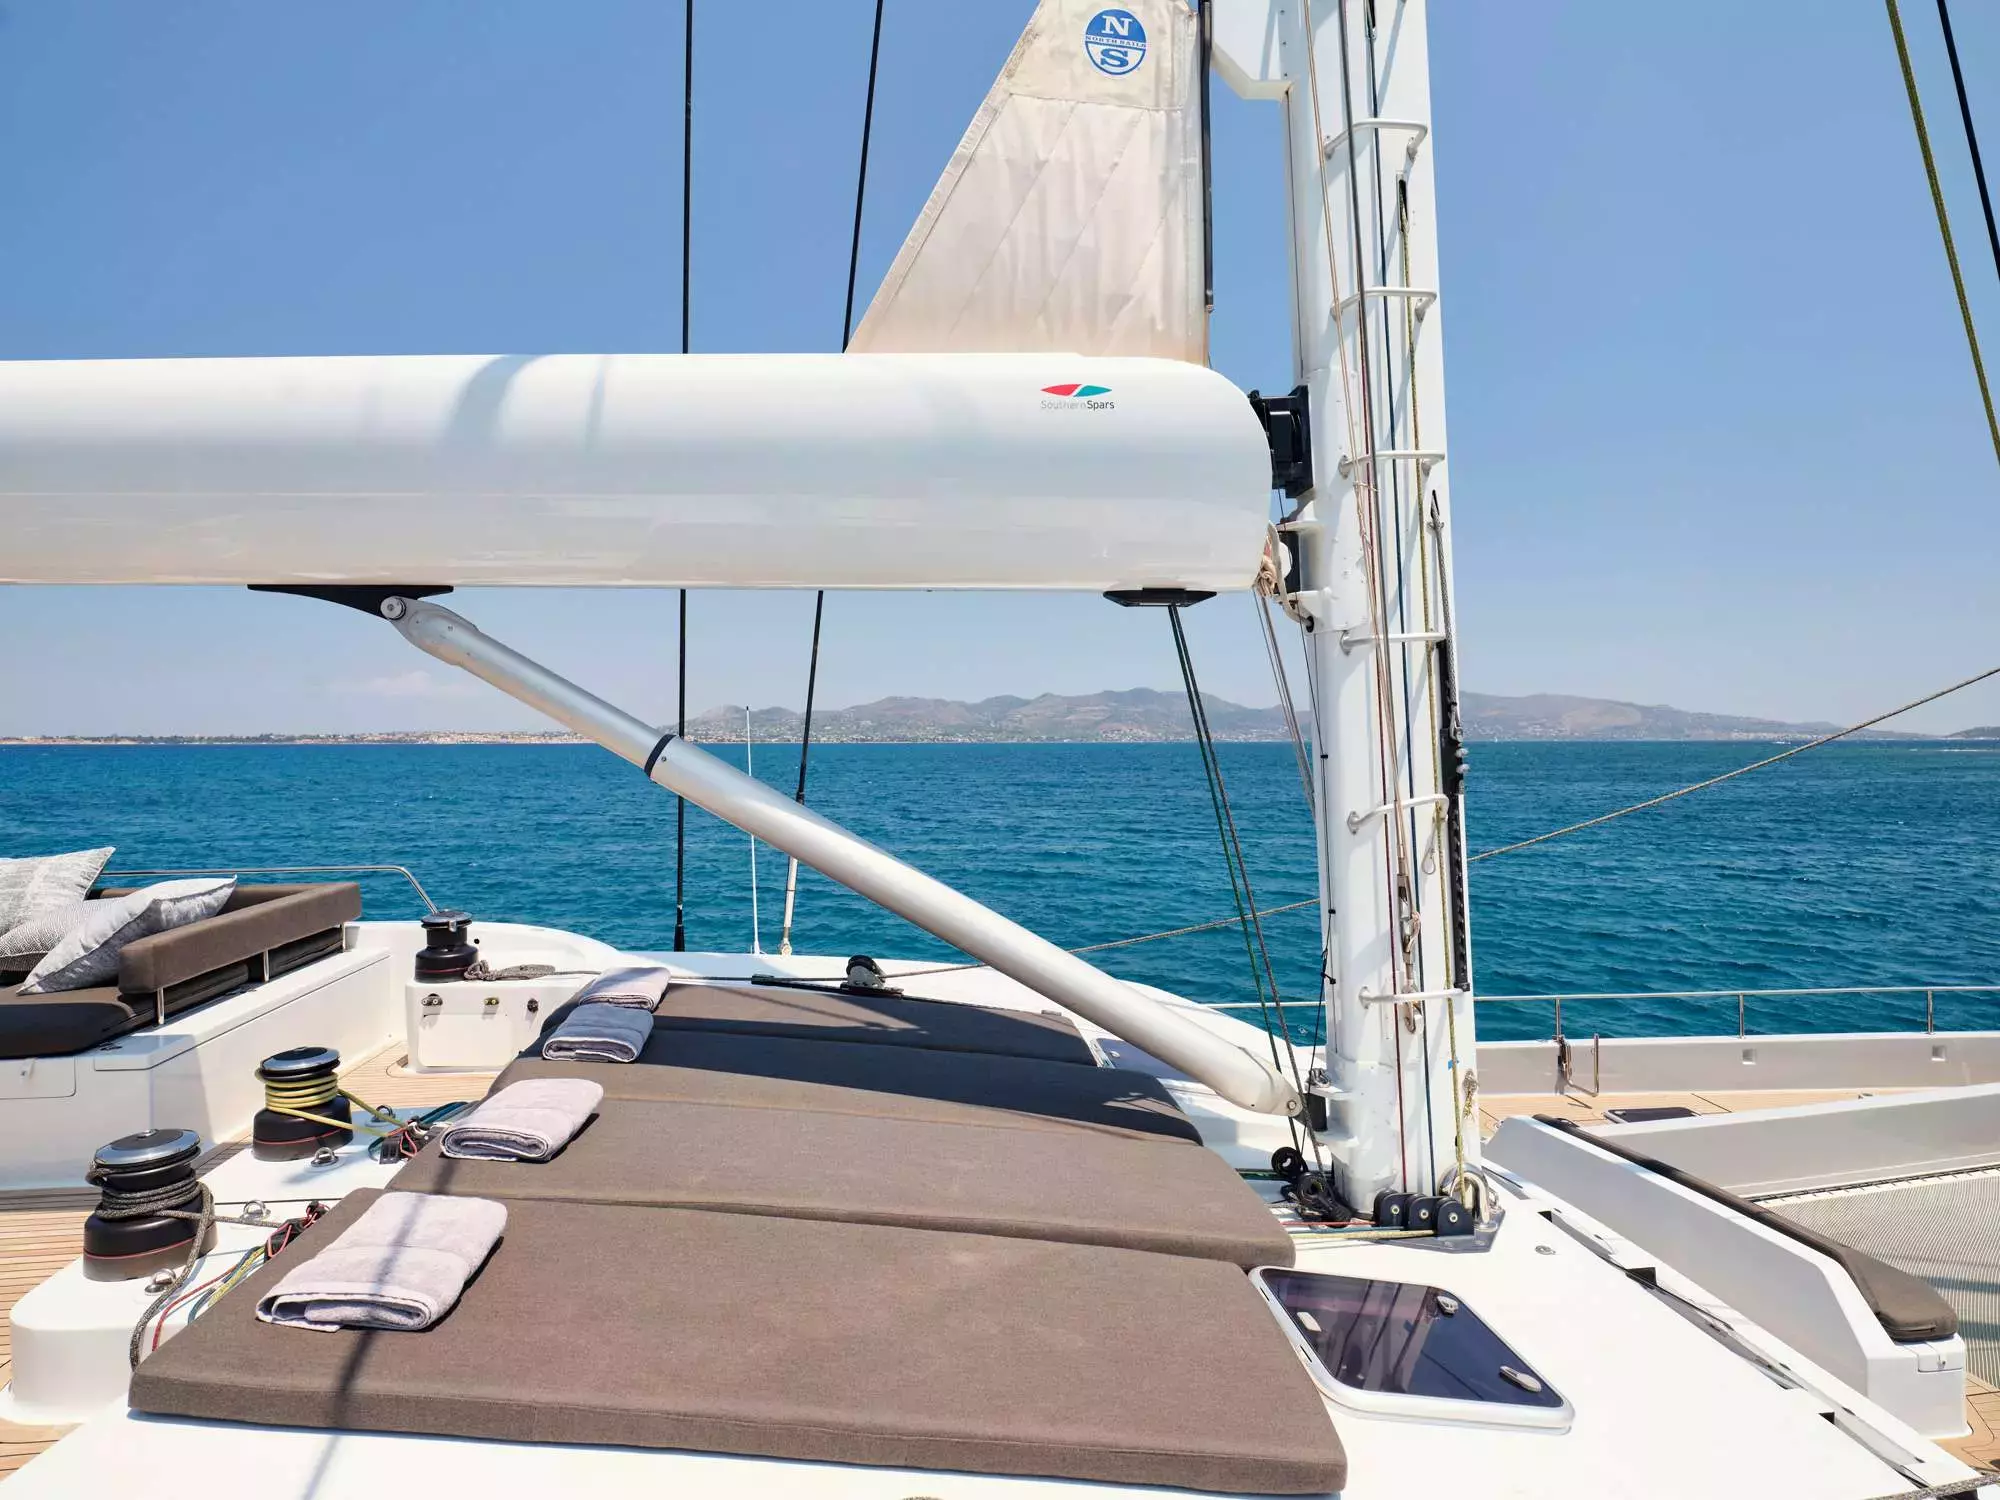 Sameli by Two Oceans - Special Offer for a private Sailing Catamaran Rental in Mykonos with a crew